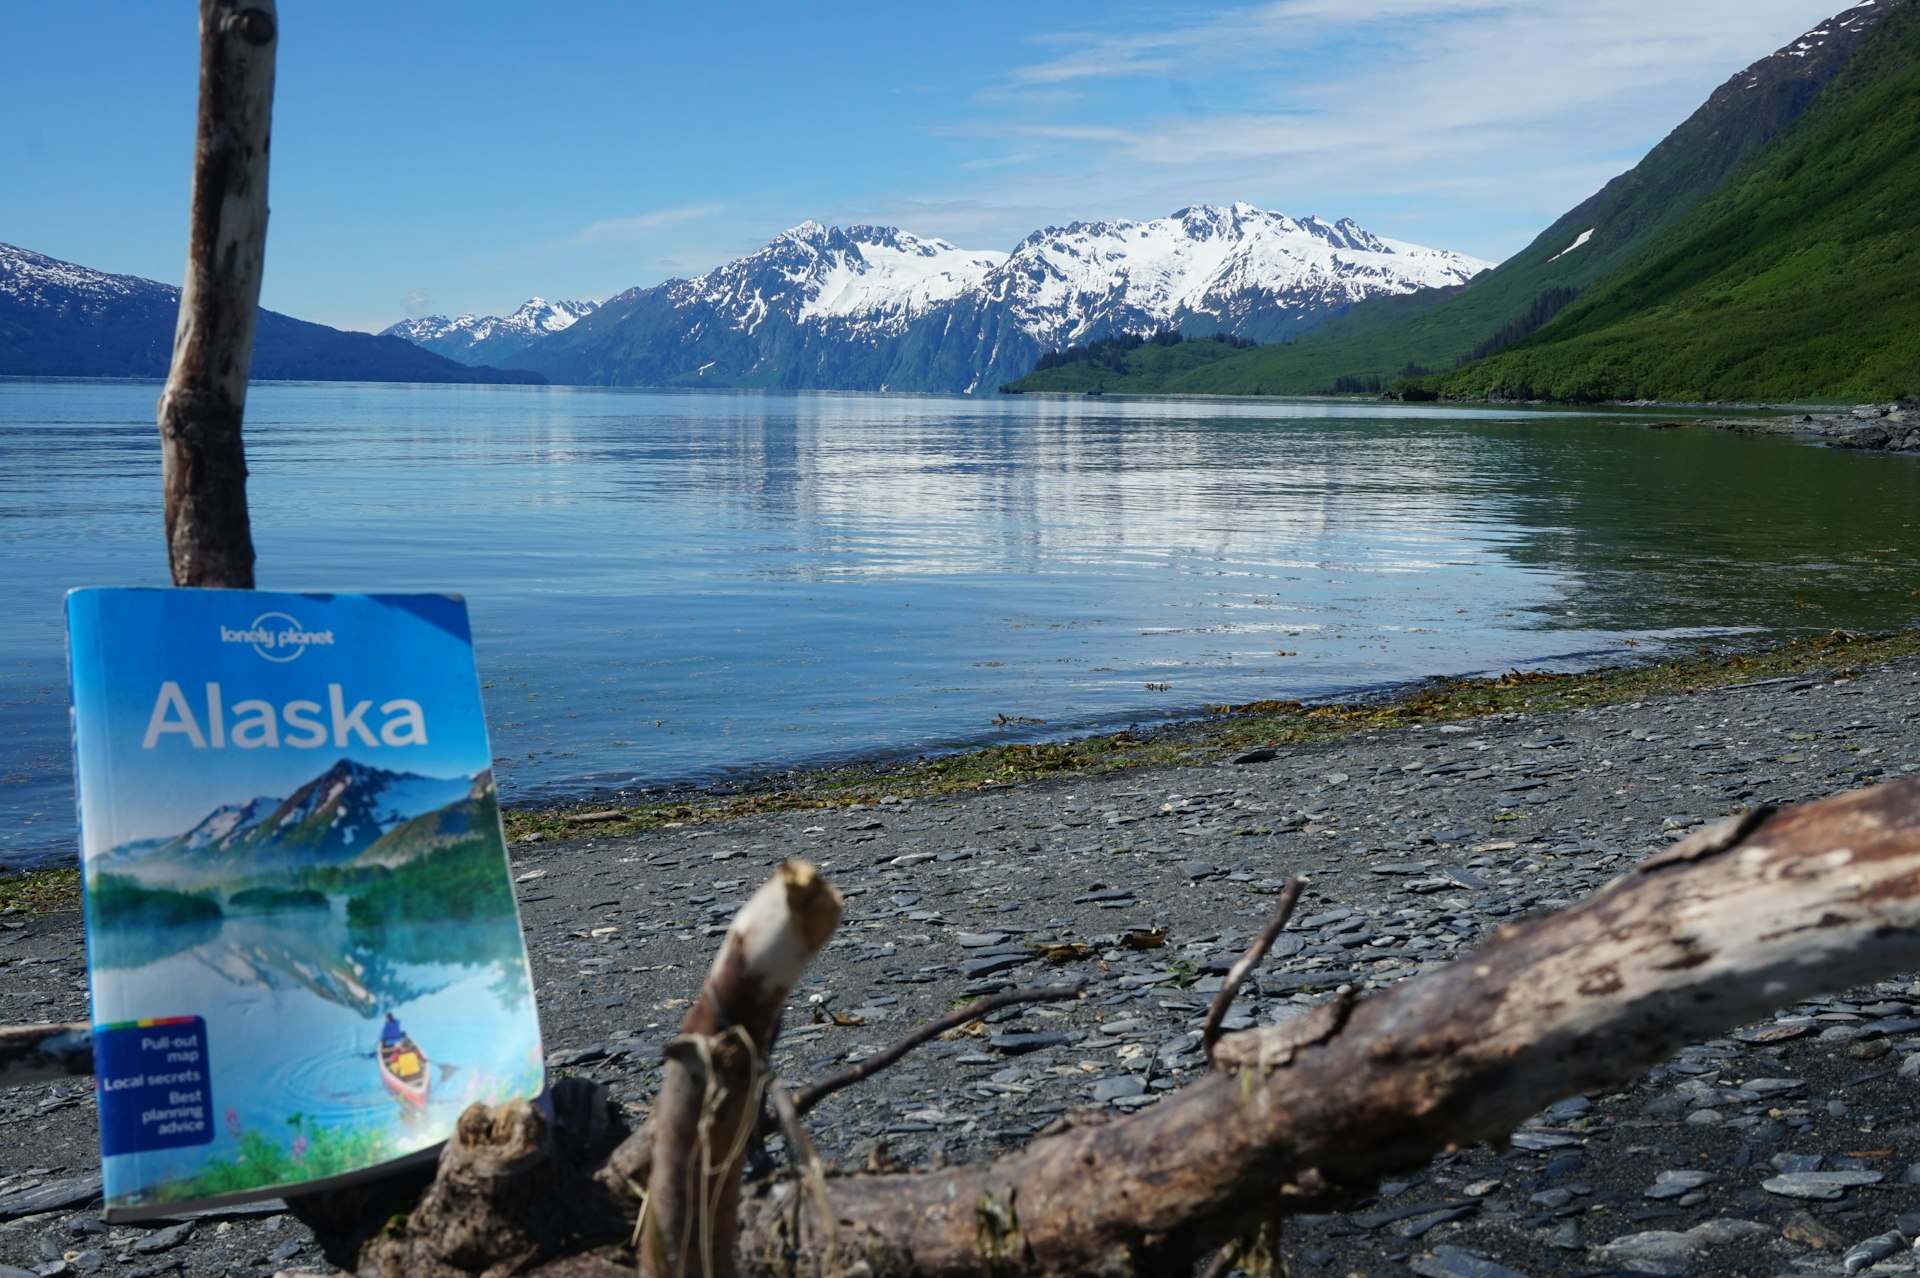 An Alaska travel guide posed in front of a bucolic scene from Alaska